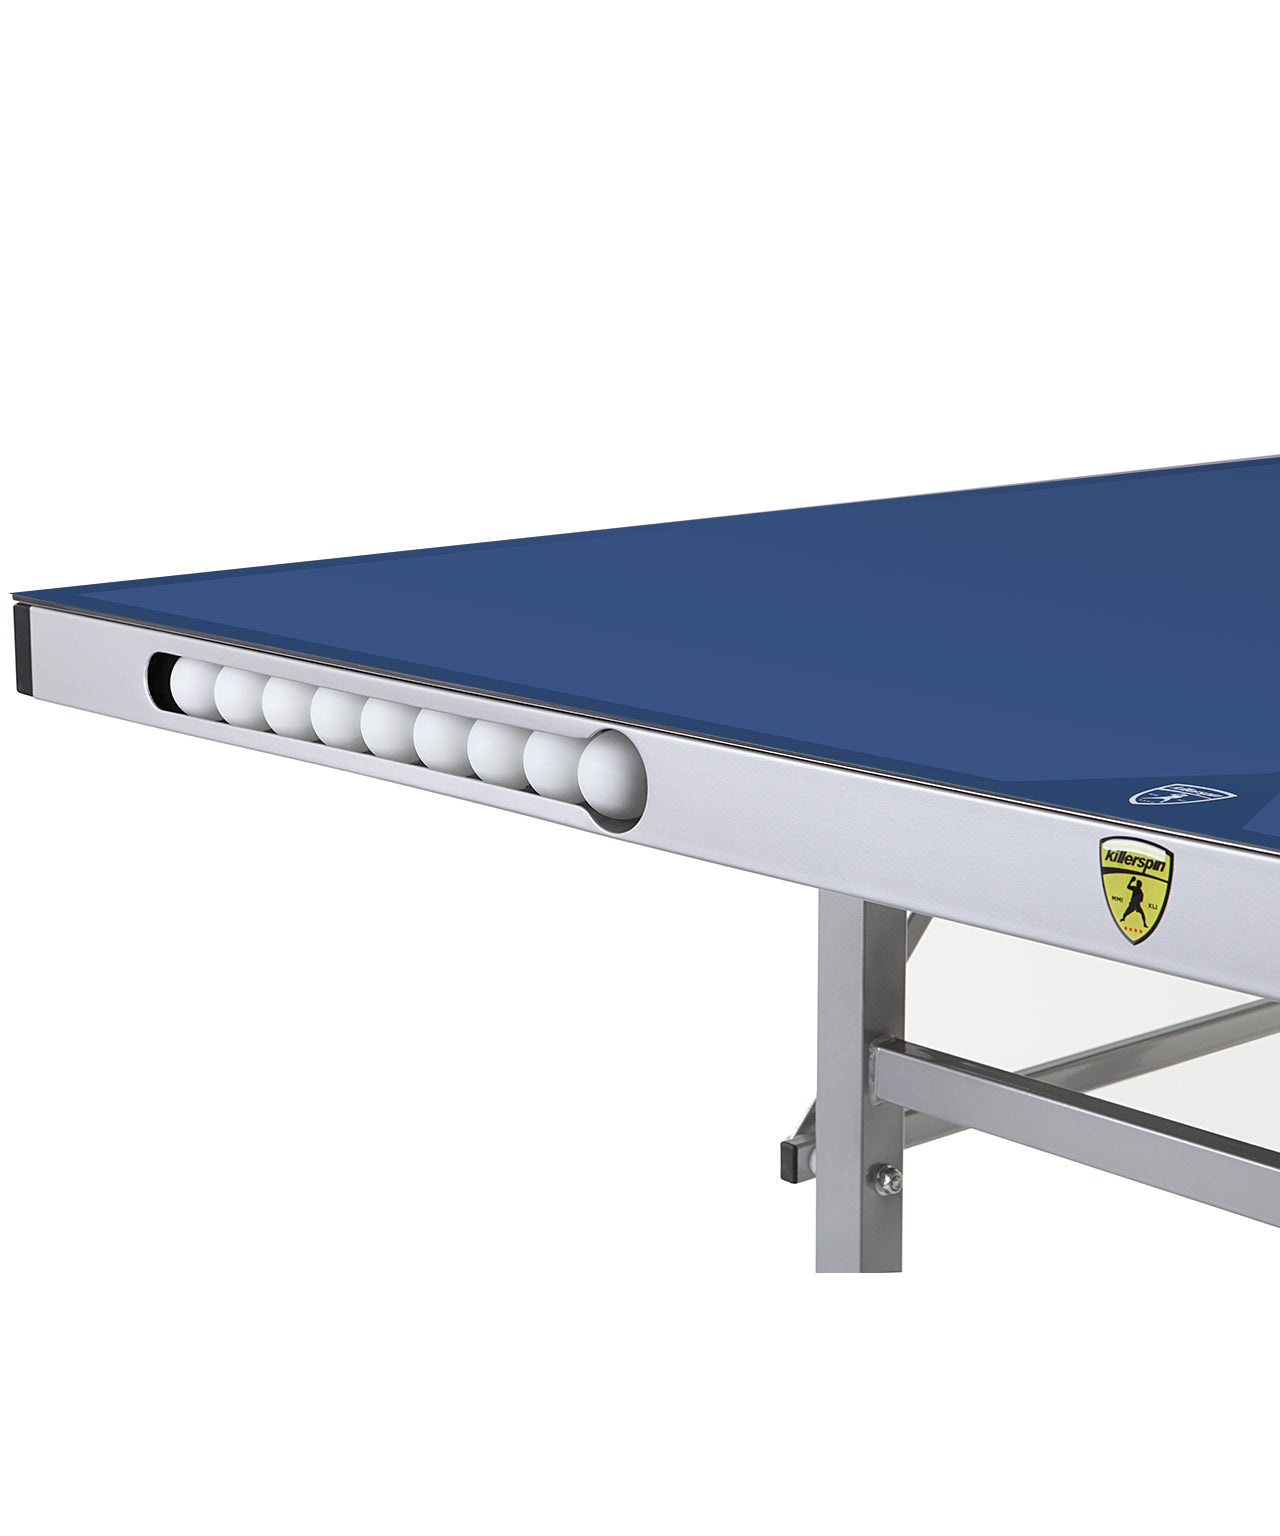 MyT7 Breeze Outdoor Ping Pong Table